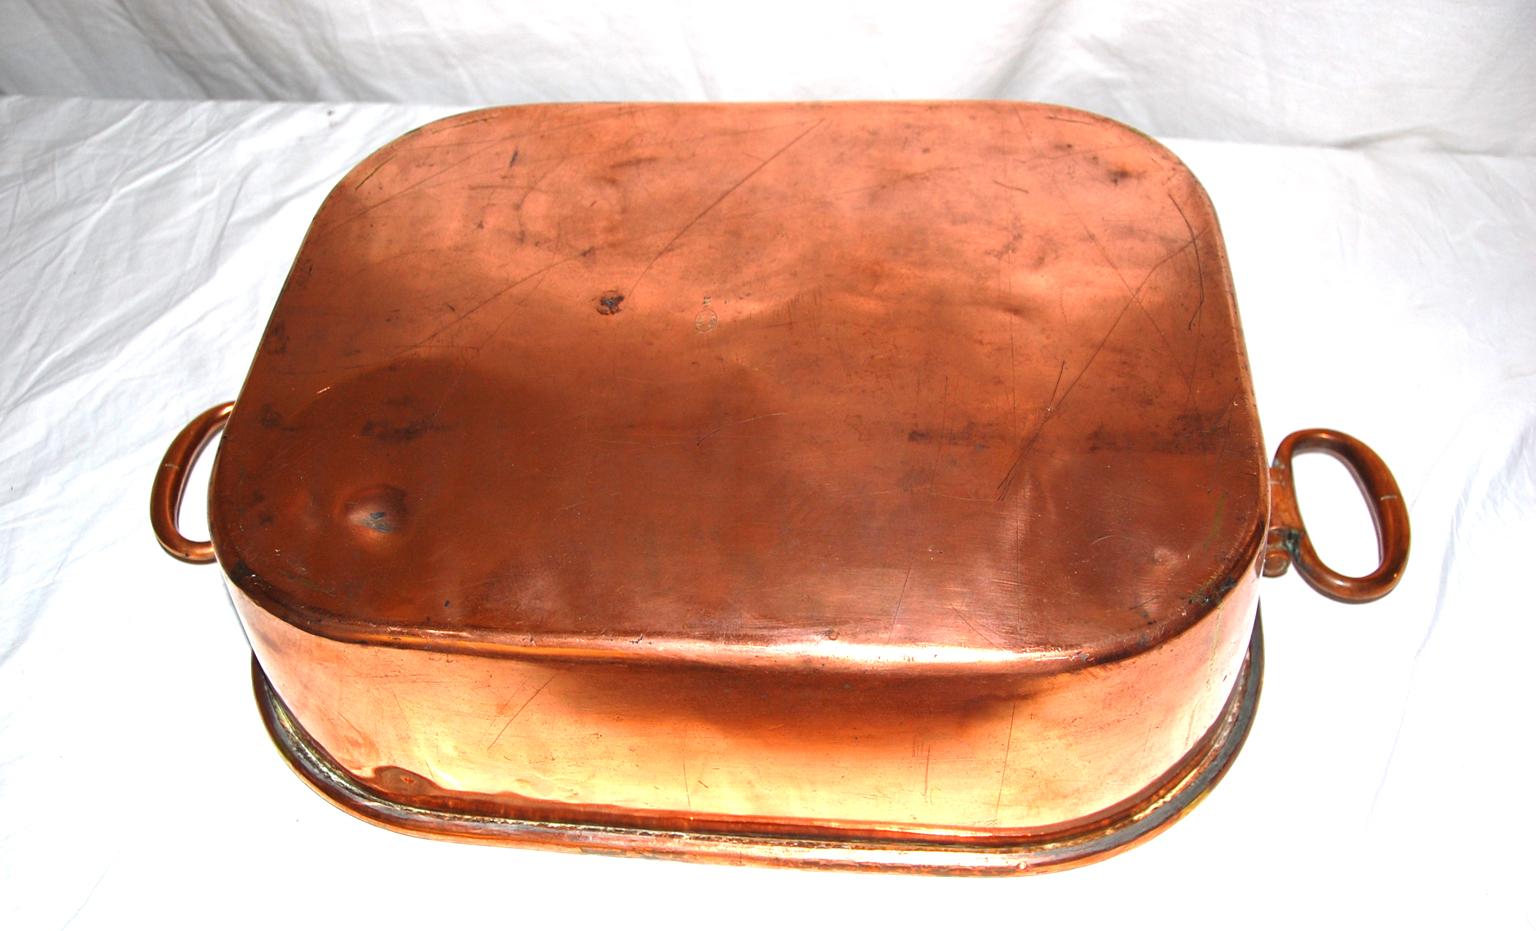 English 19th Century Army and Navy Copper Dovetailed Roasting Pan 1